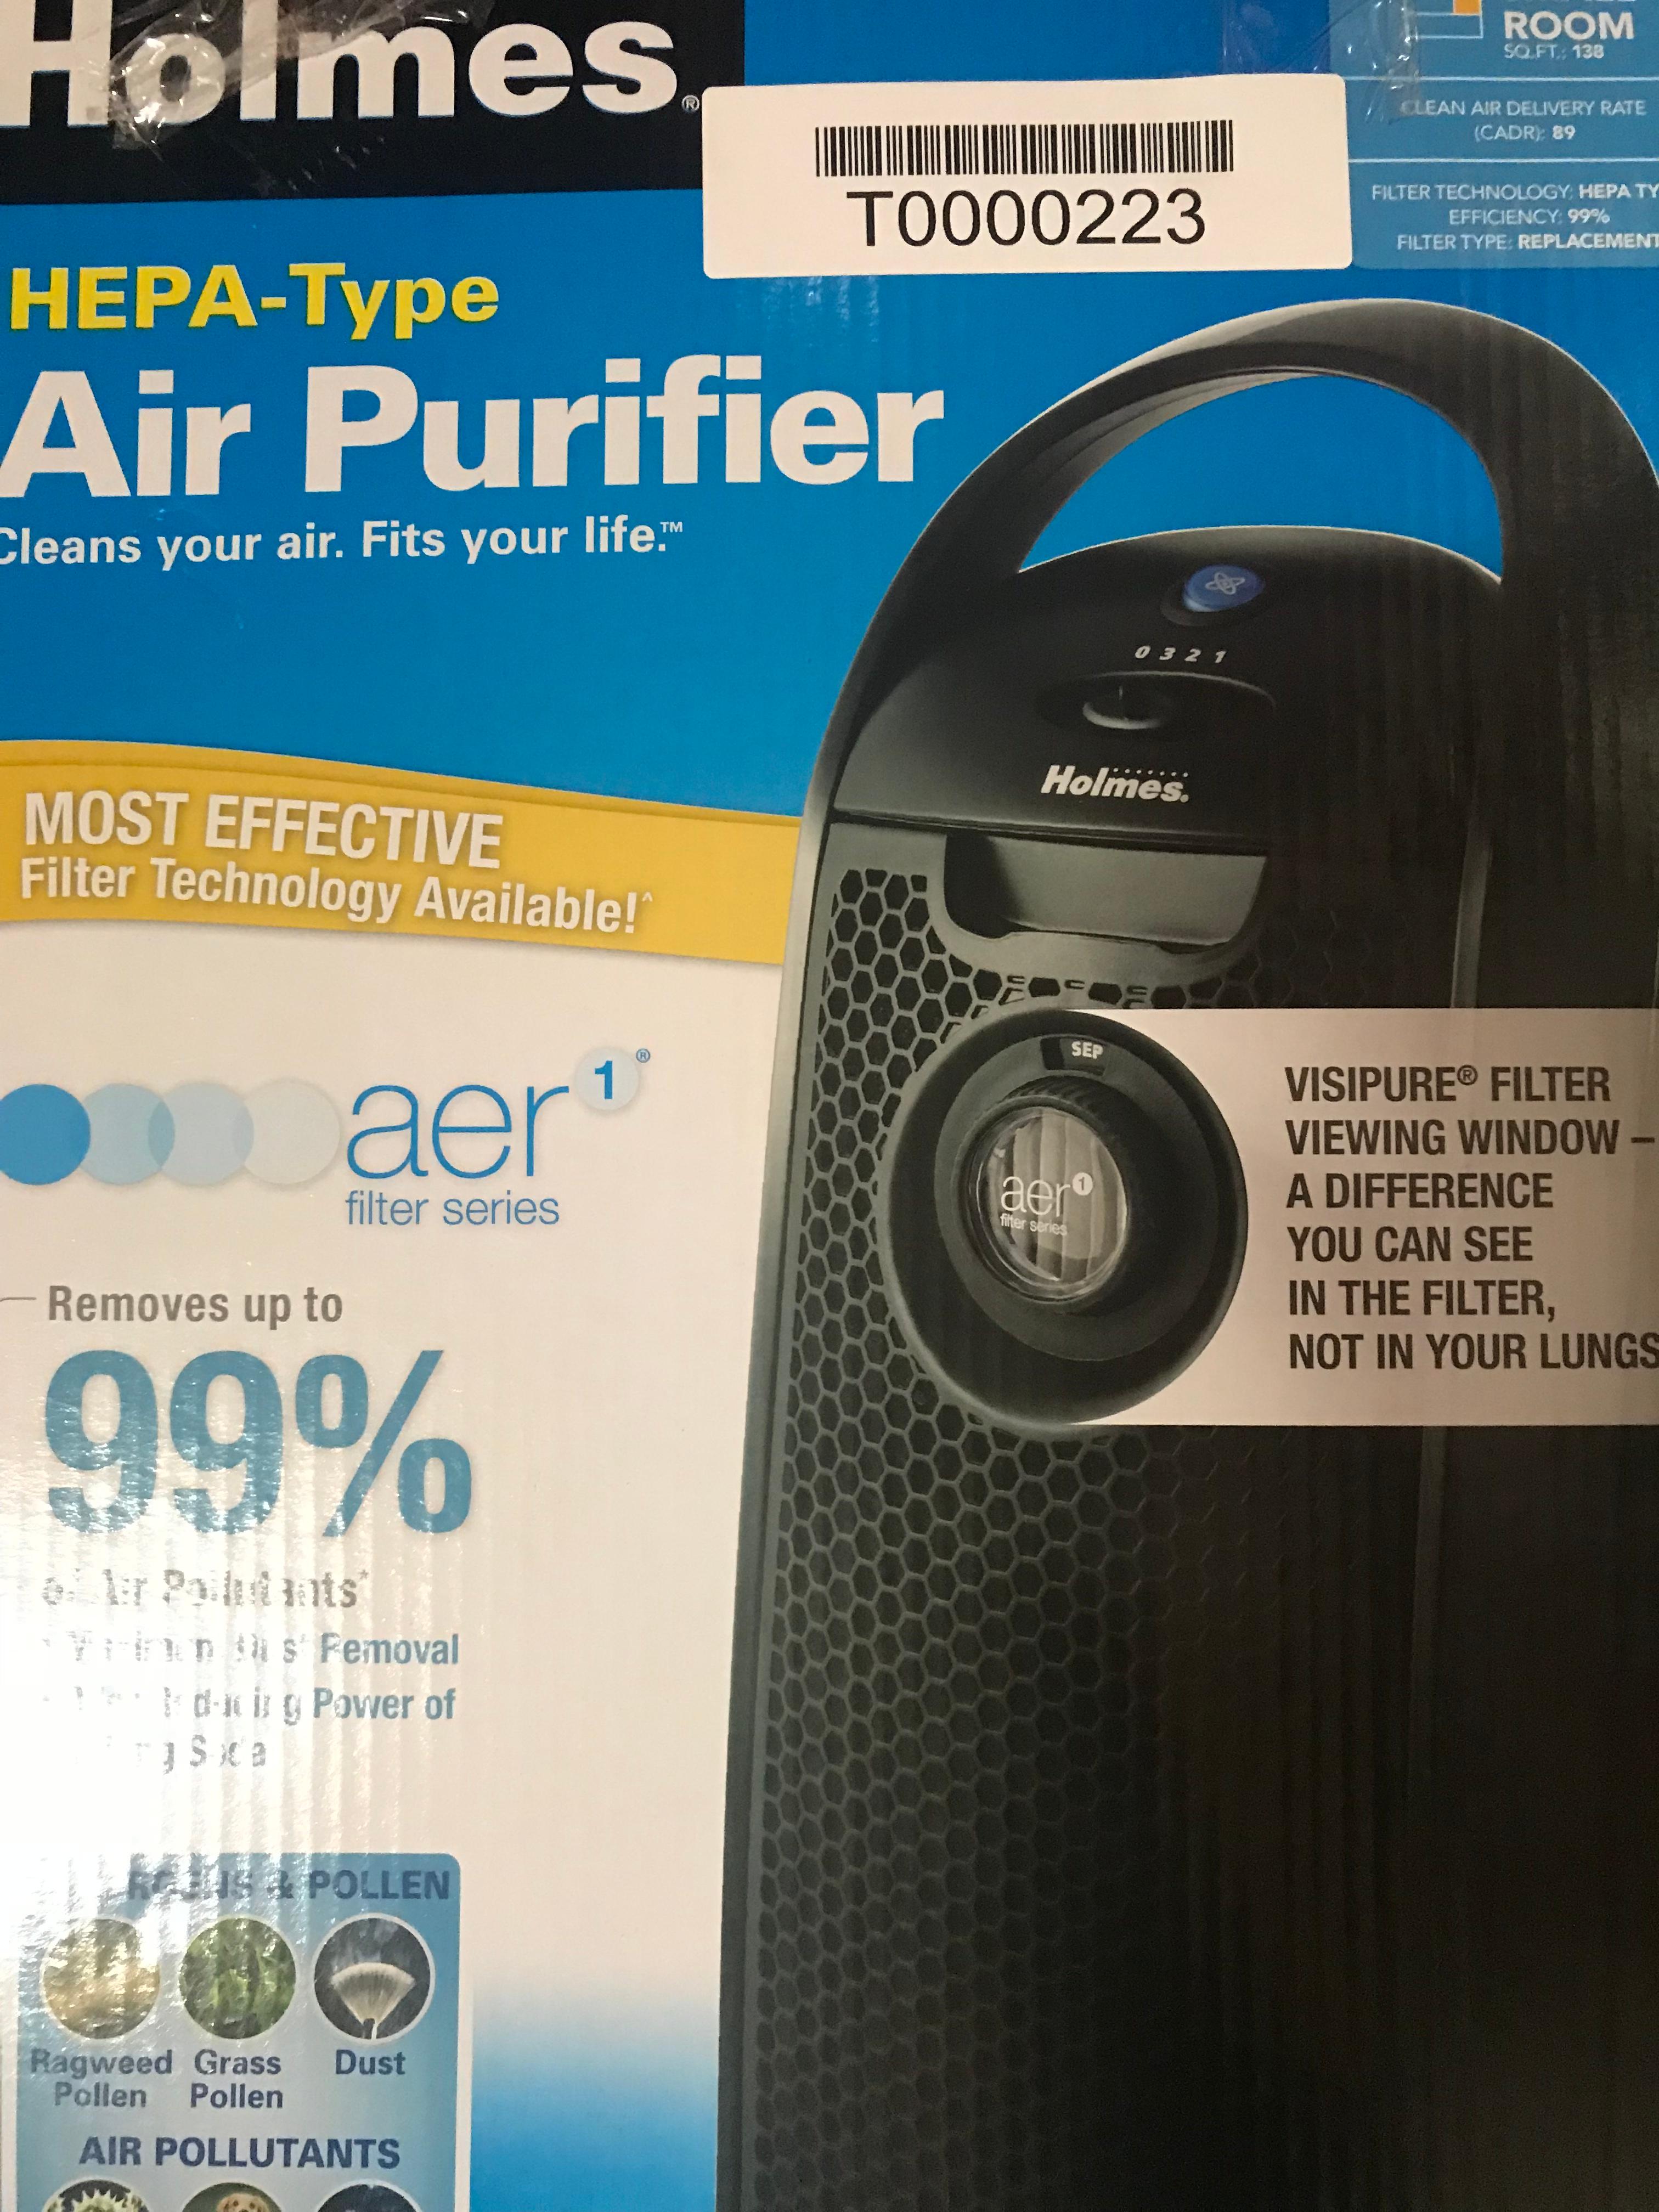 Holmes aer1 Tower Air Purifier with Visipure. $76.72 ERV